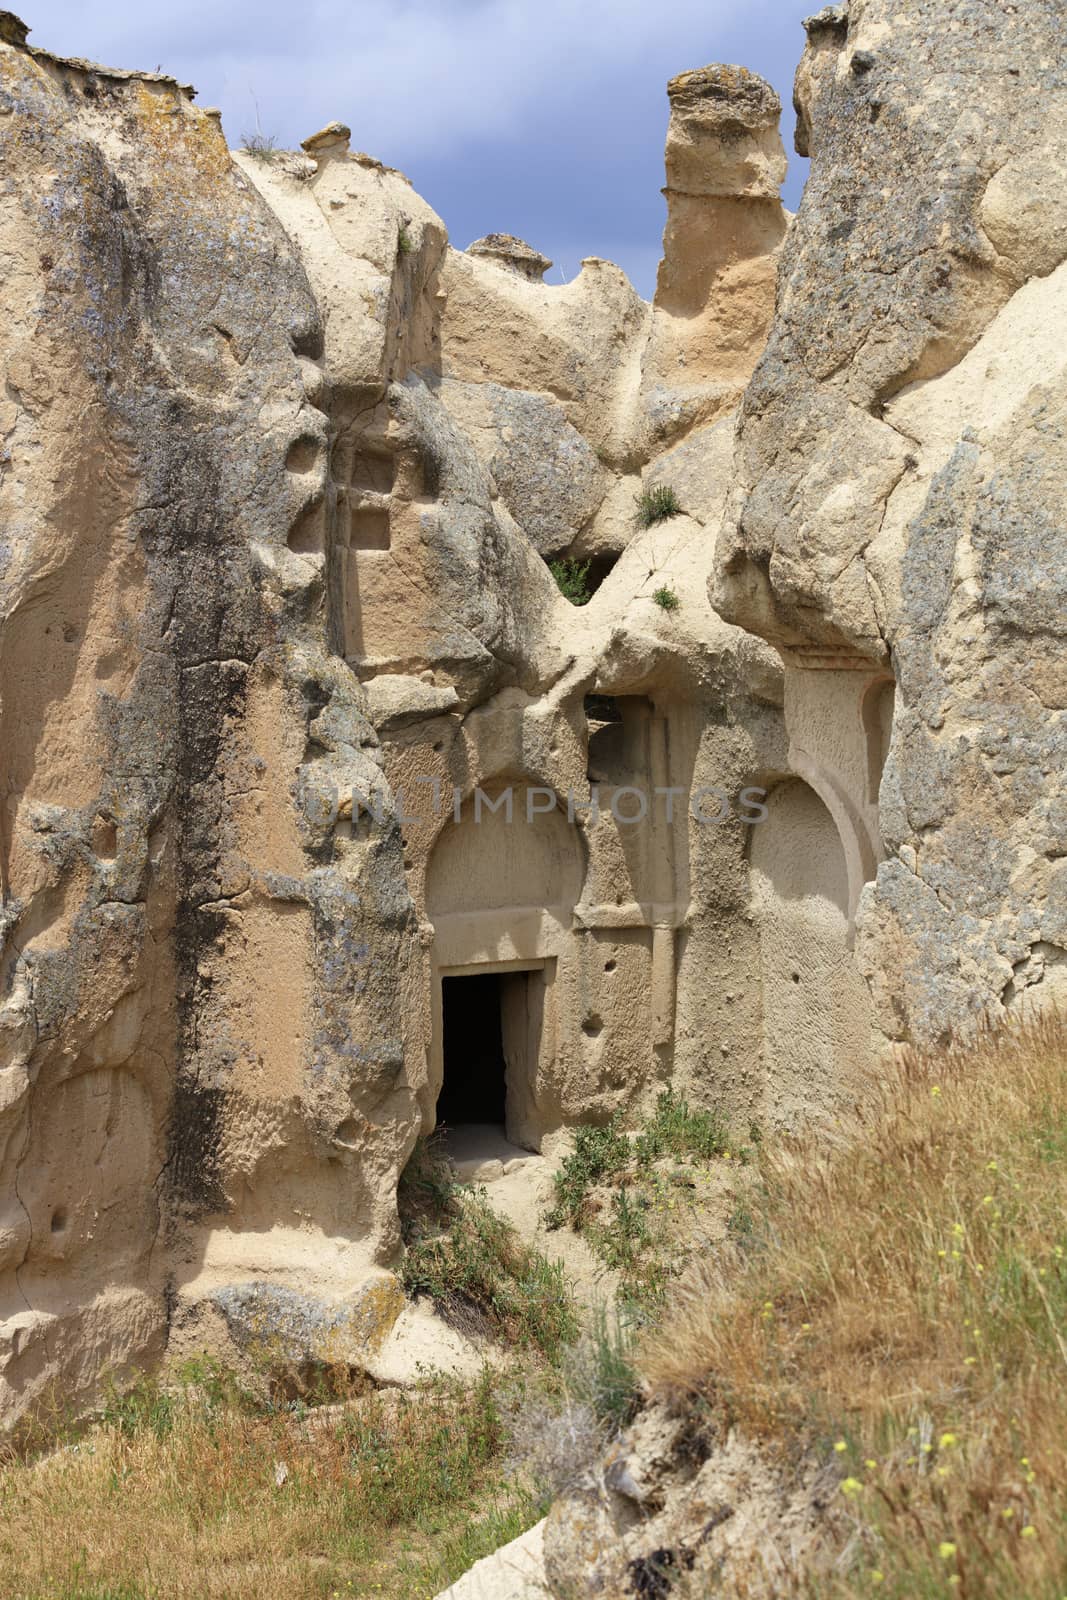 Mysterious inconspicuous entrance to the old ancient cave temple carved into the mountain valley of Cappadocia